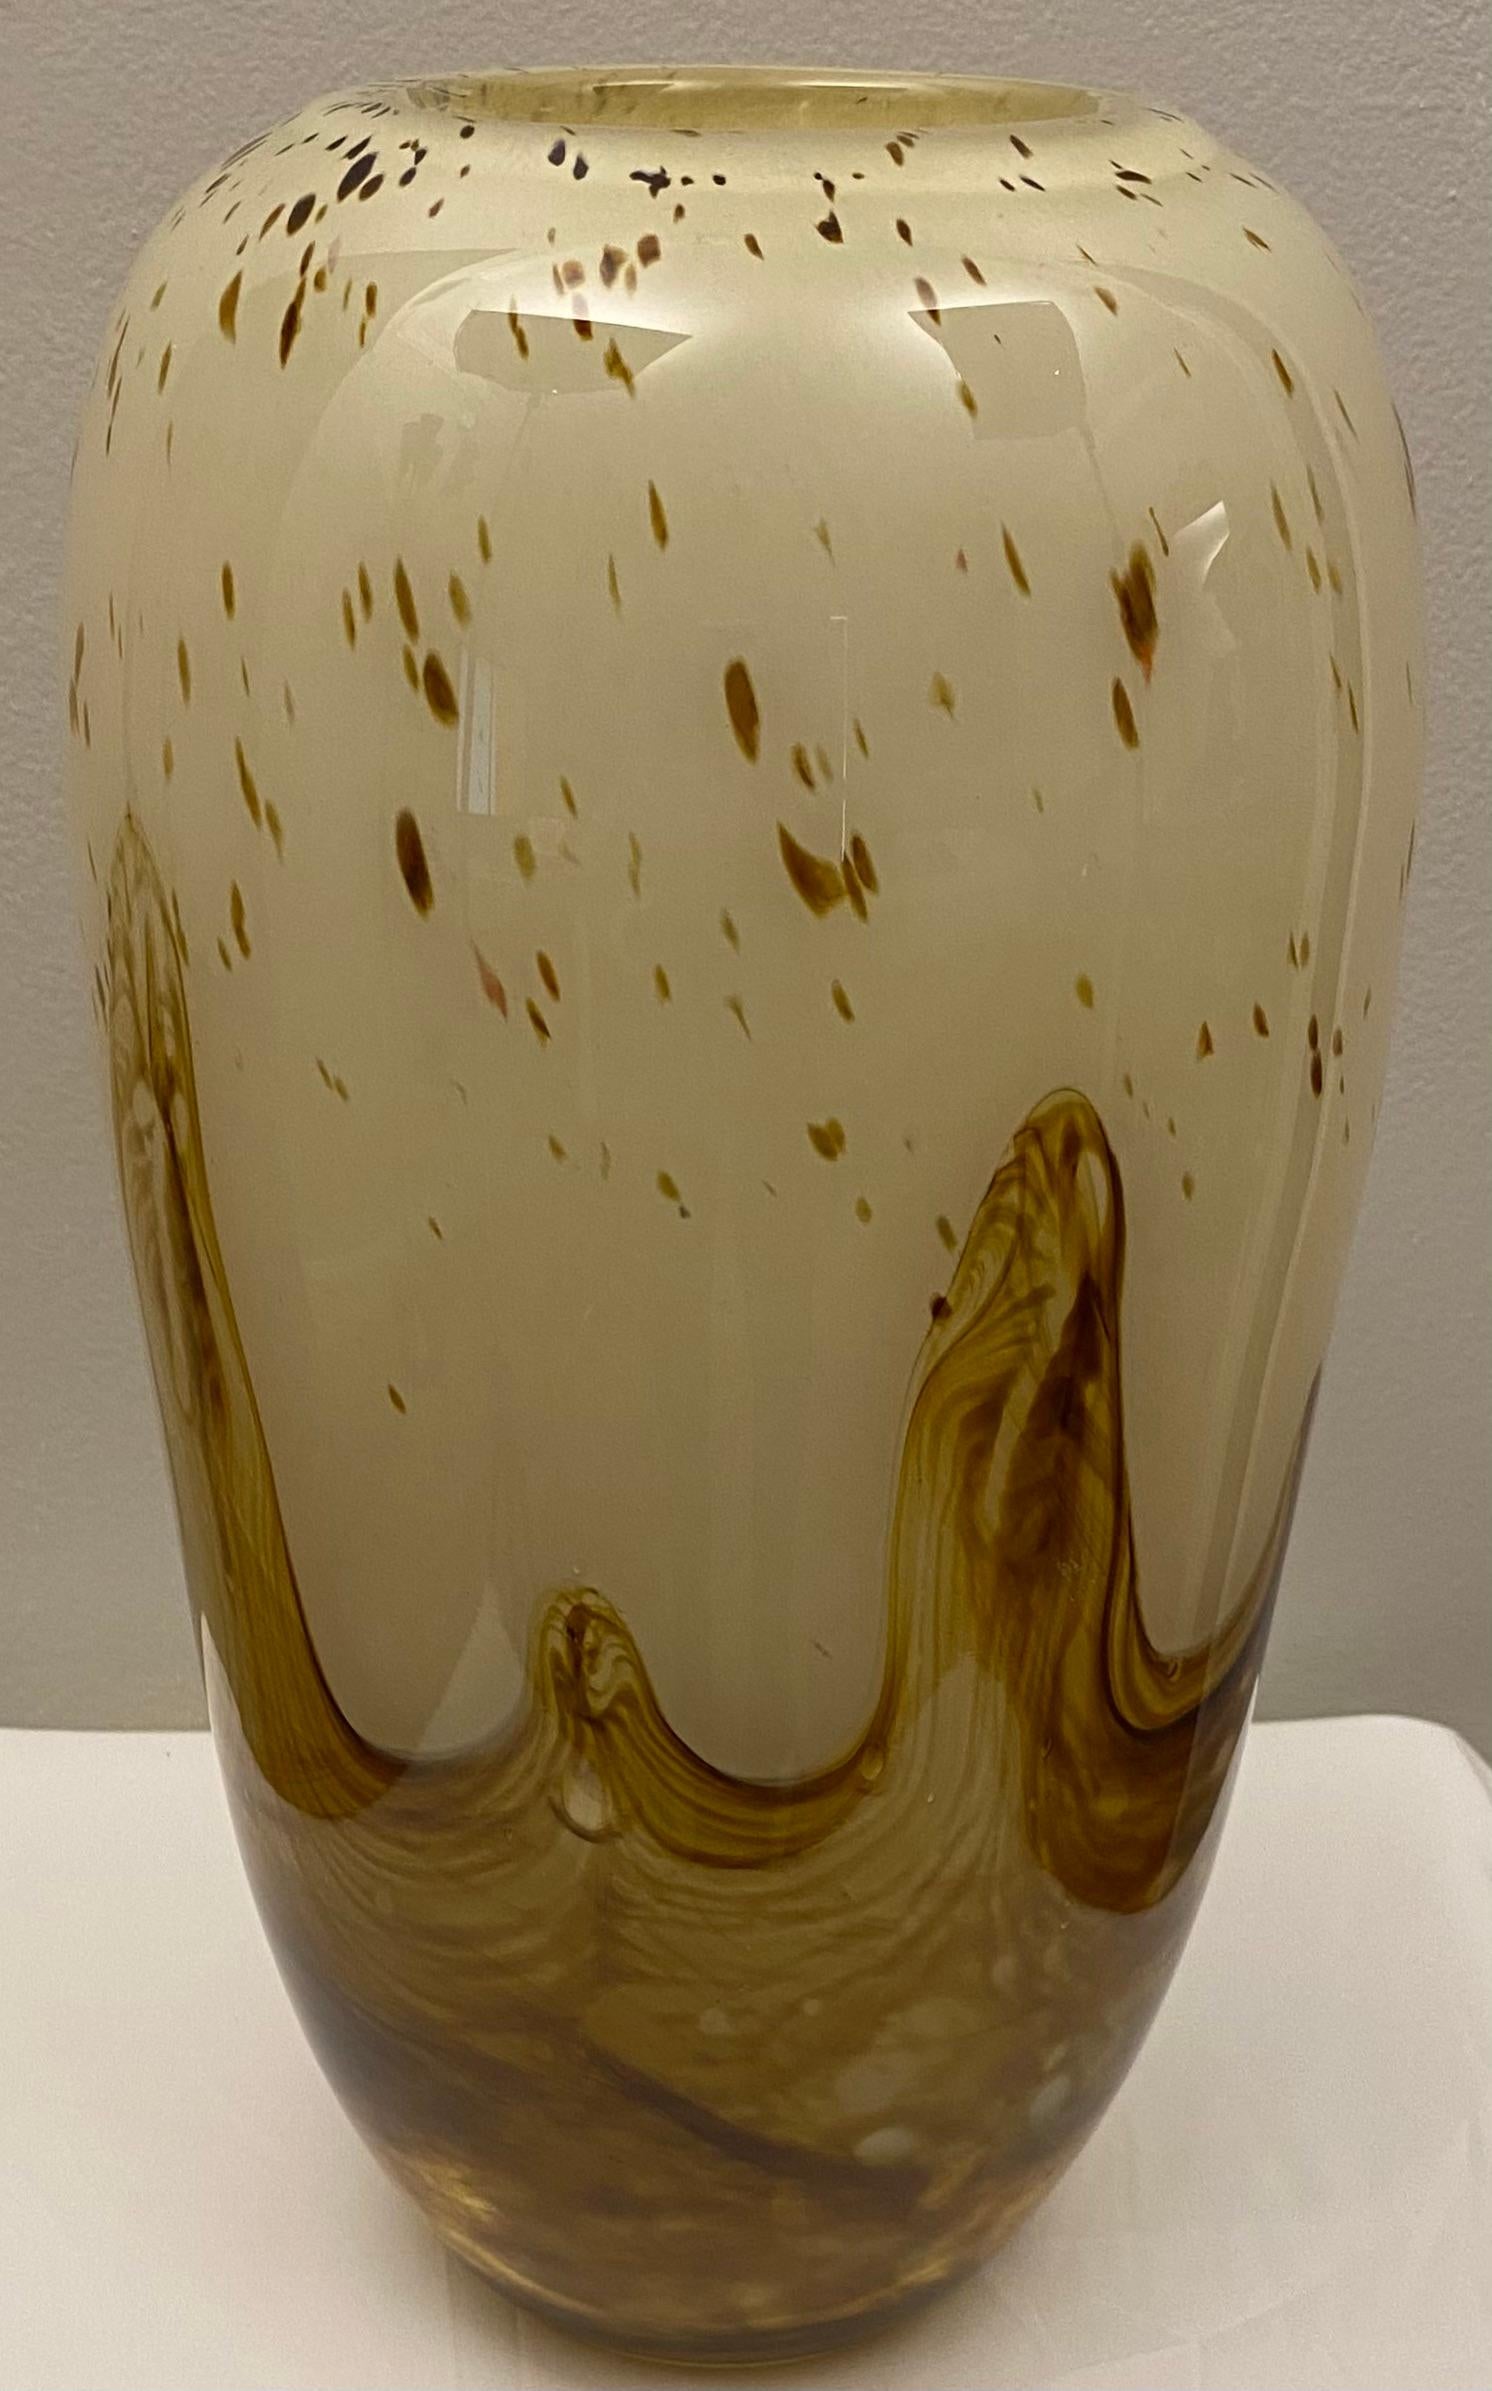 Hand-Crafted Large Midcentury Murano Art Glass Vase, Beige & Amber Attrib. to Fratelli Toso For Sale